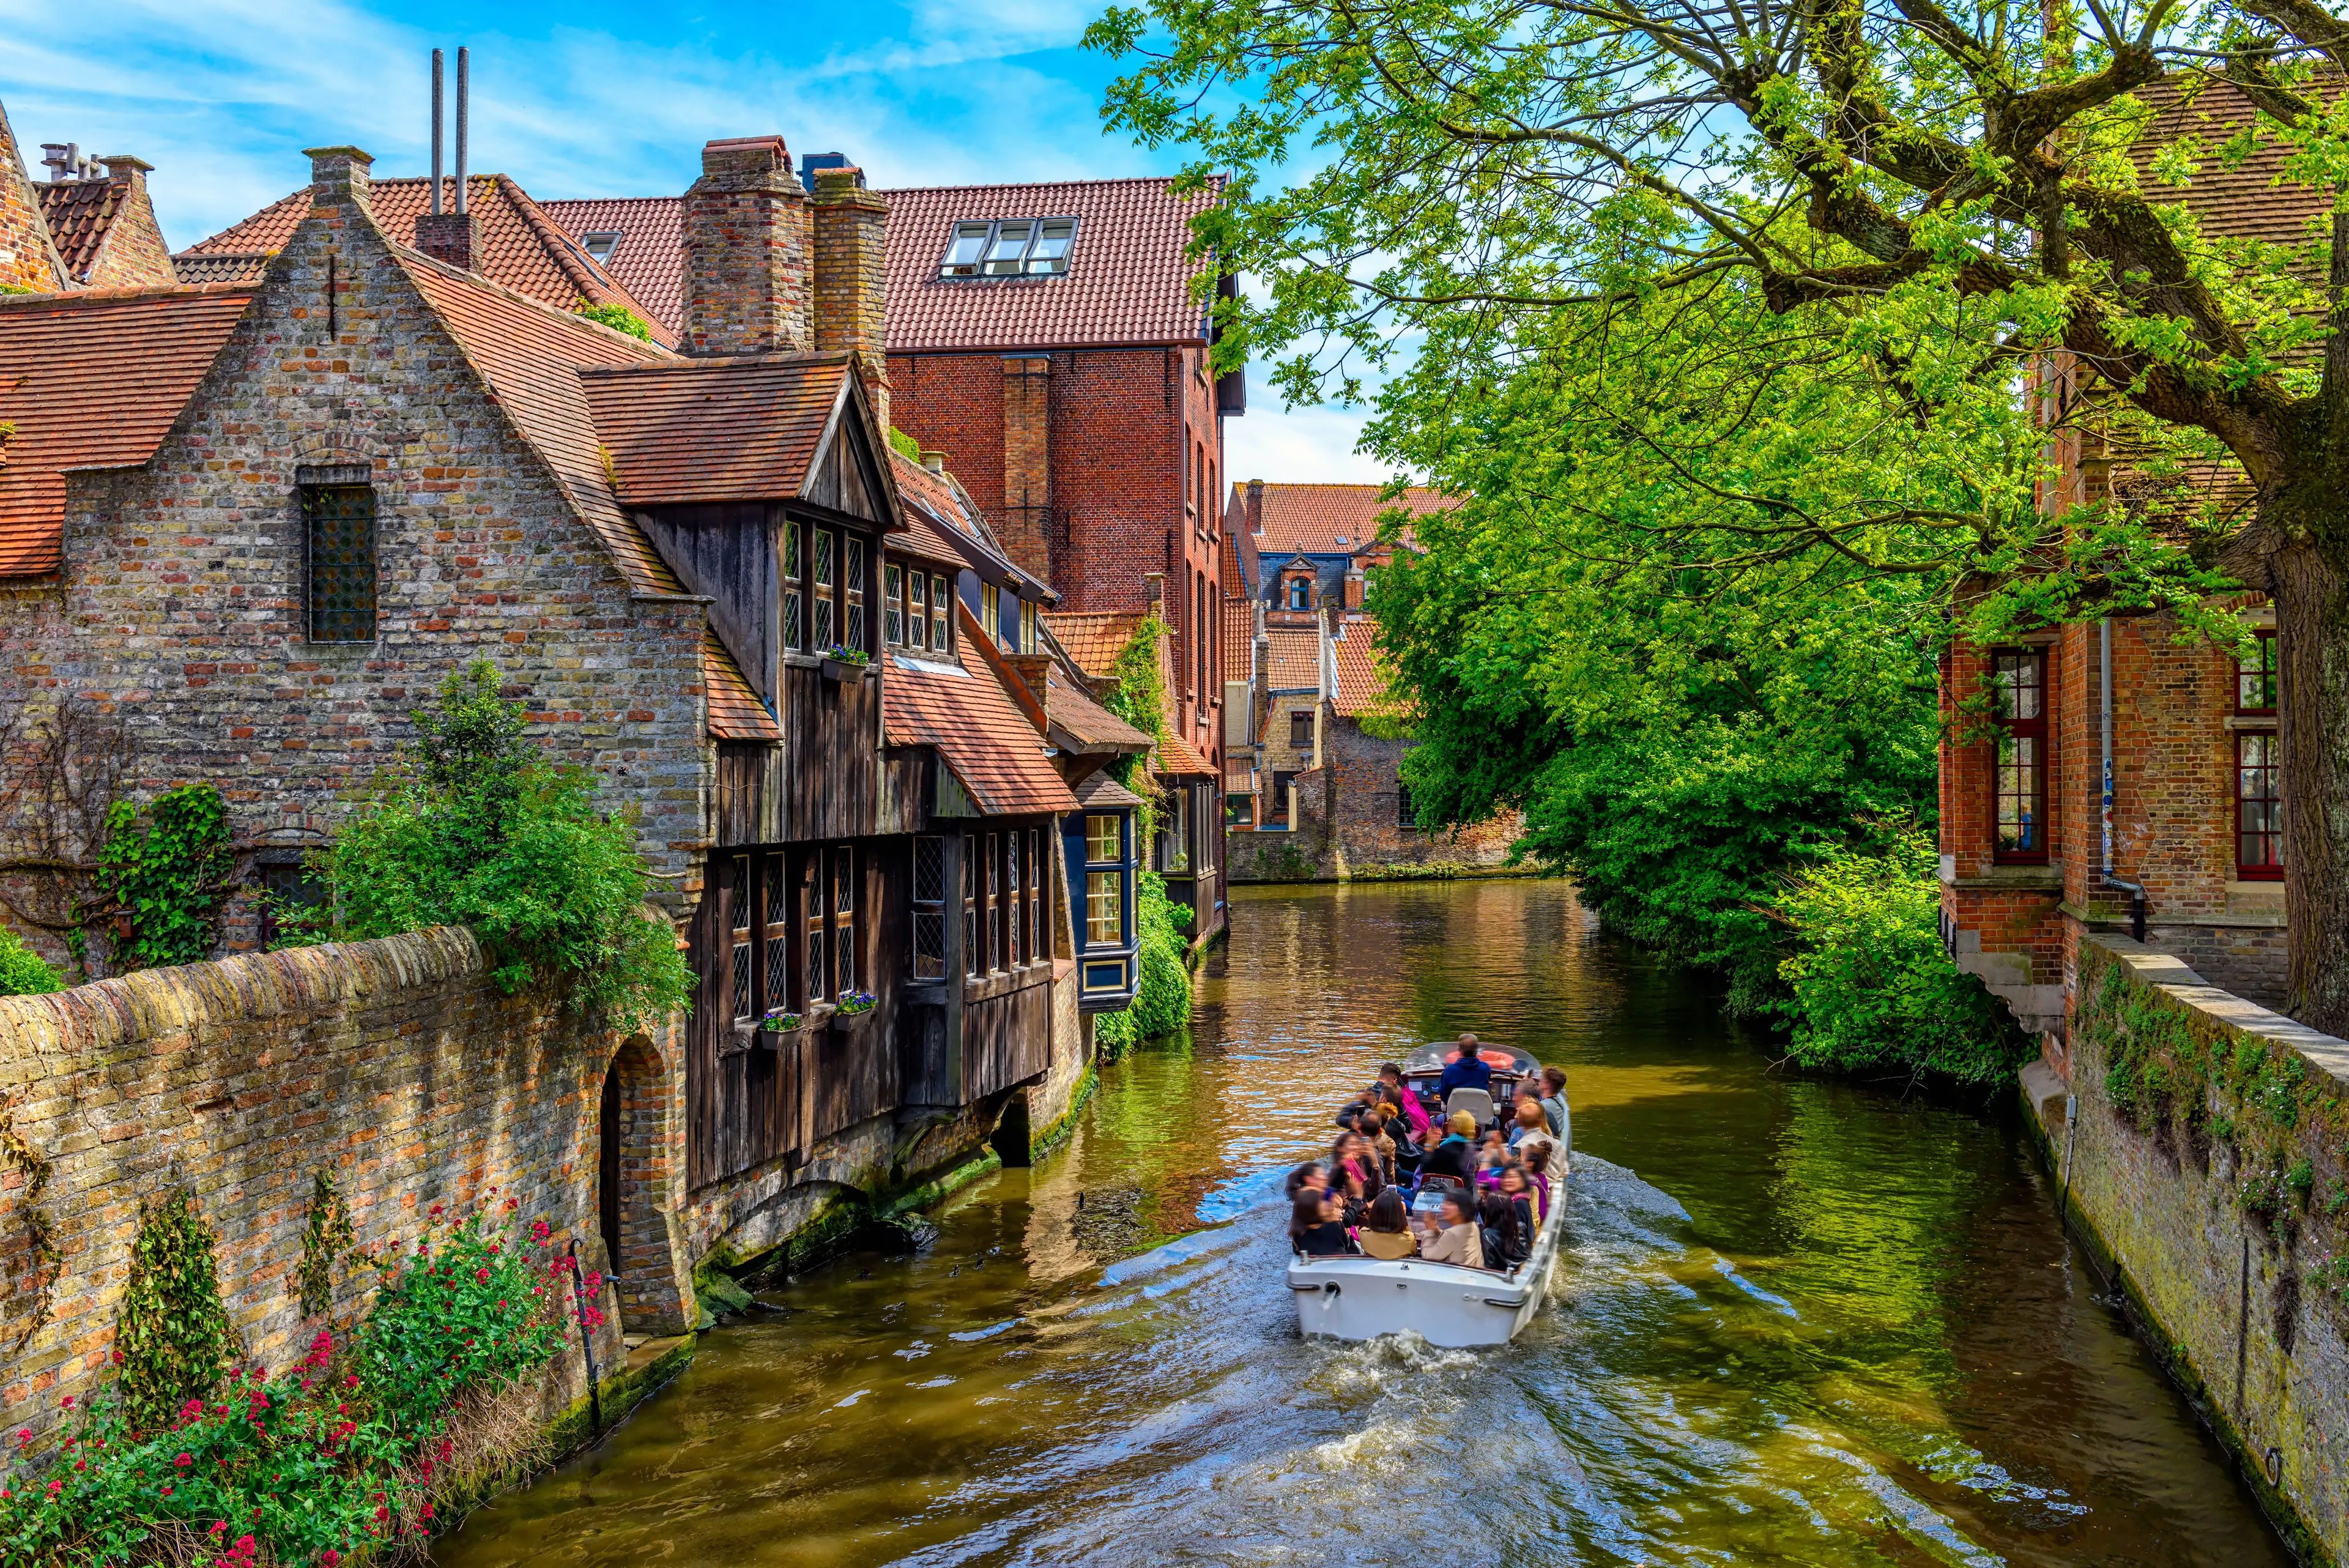 1-Day Local Family Adventure and Shopping Excursion in Bruges